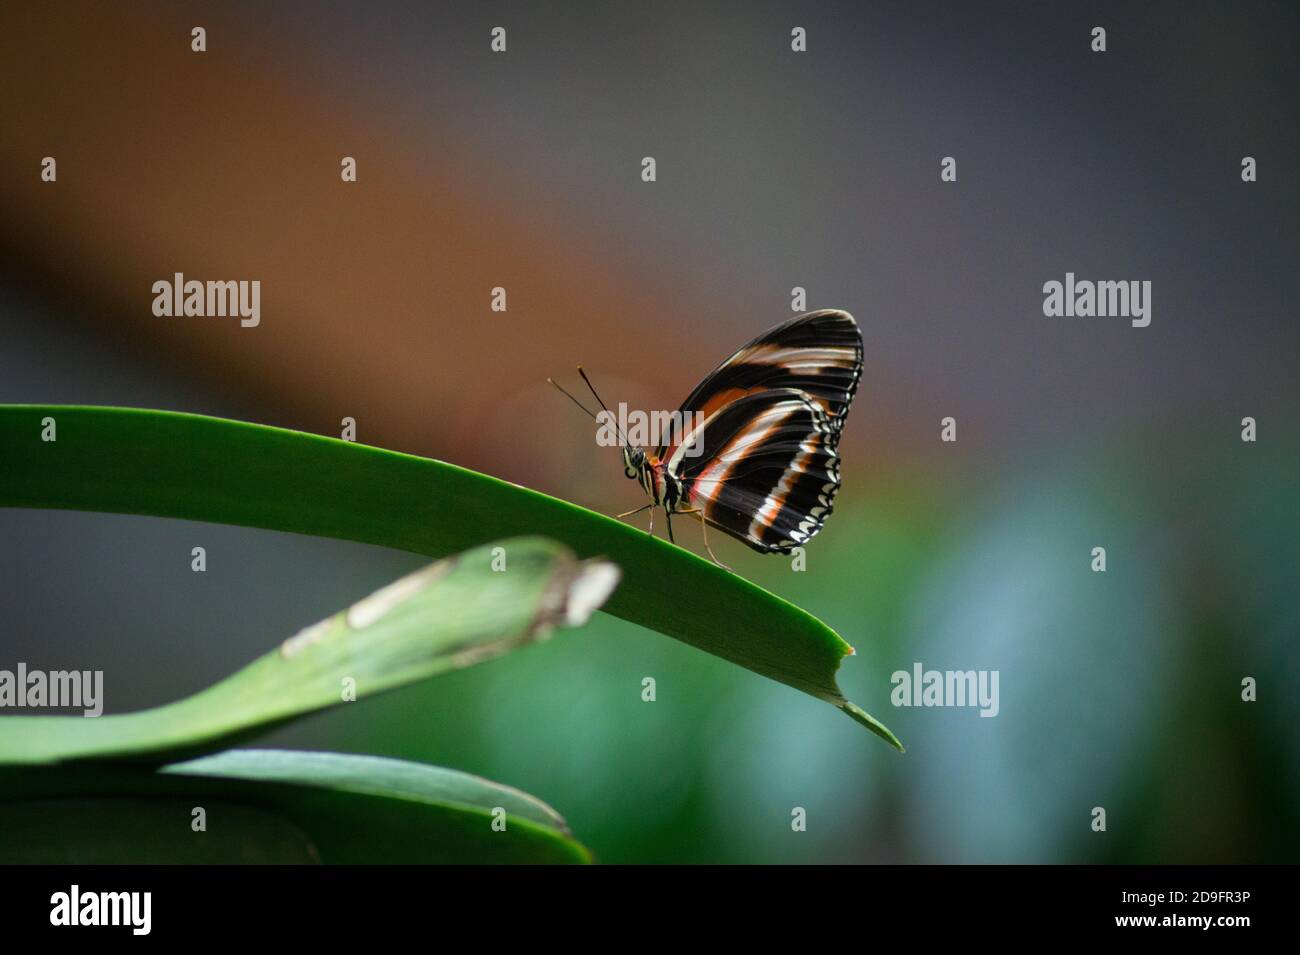 Butterfly on a blade of grass Stock Photo